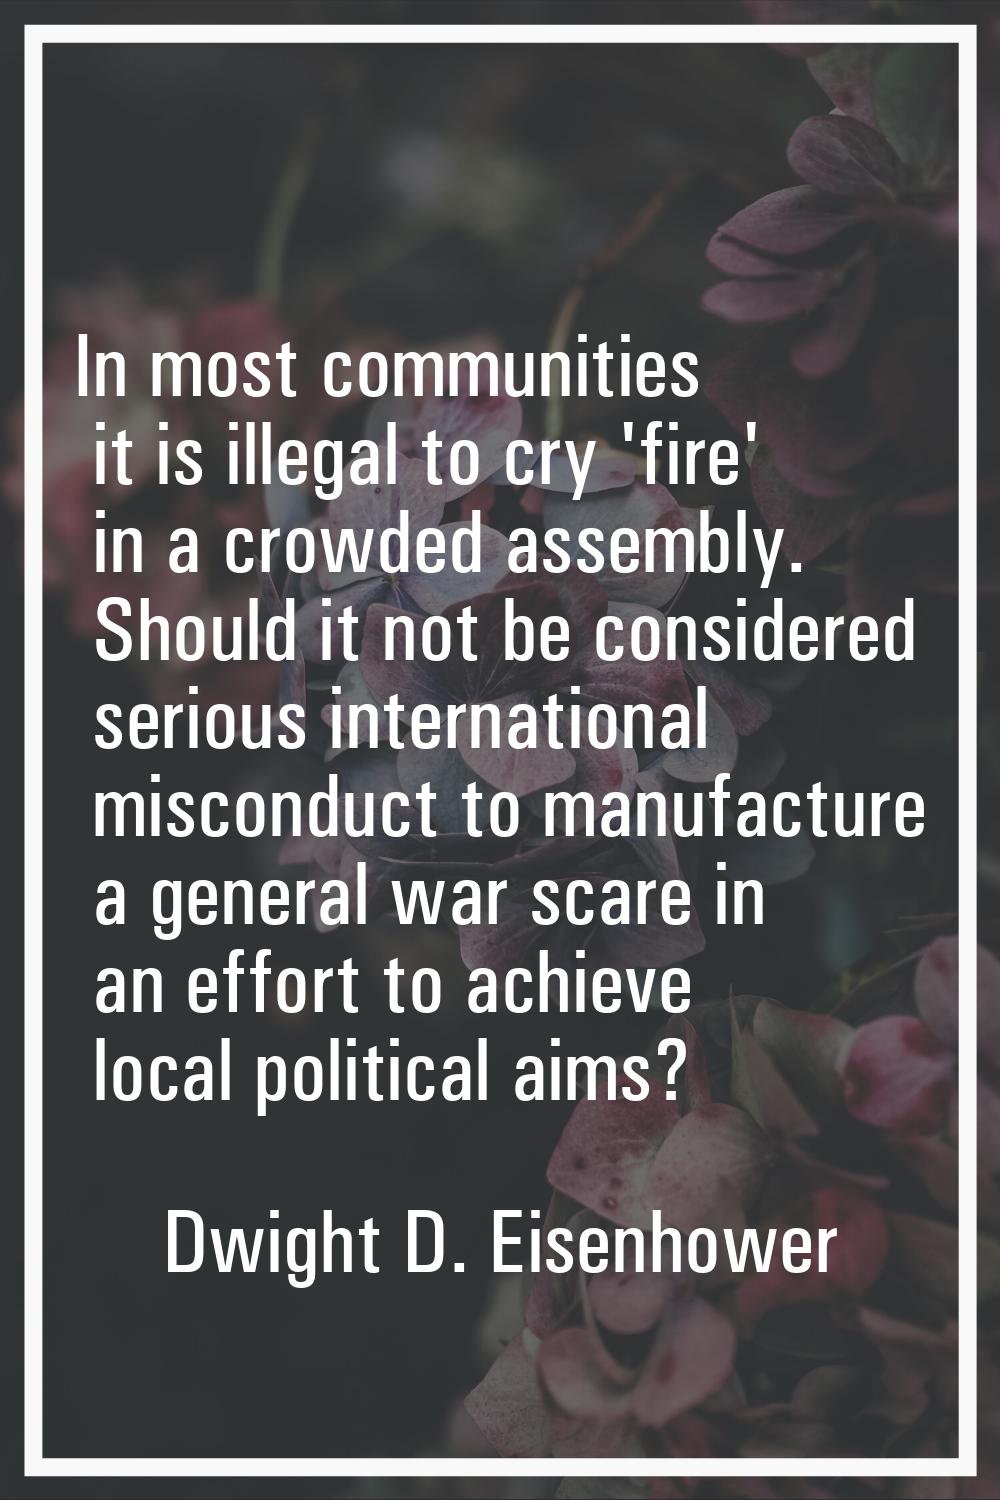 In most communities it is illegal to cry 'fire' in a crowded assembly. Should it not be considered 